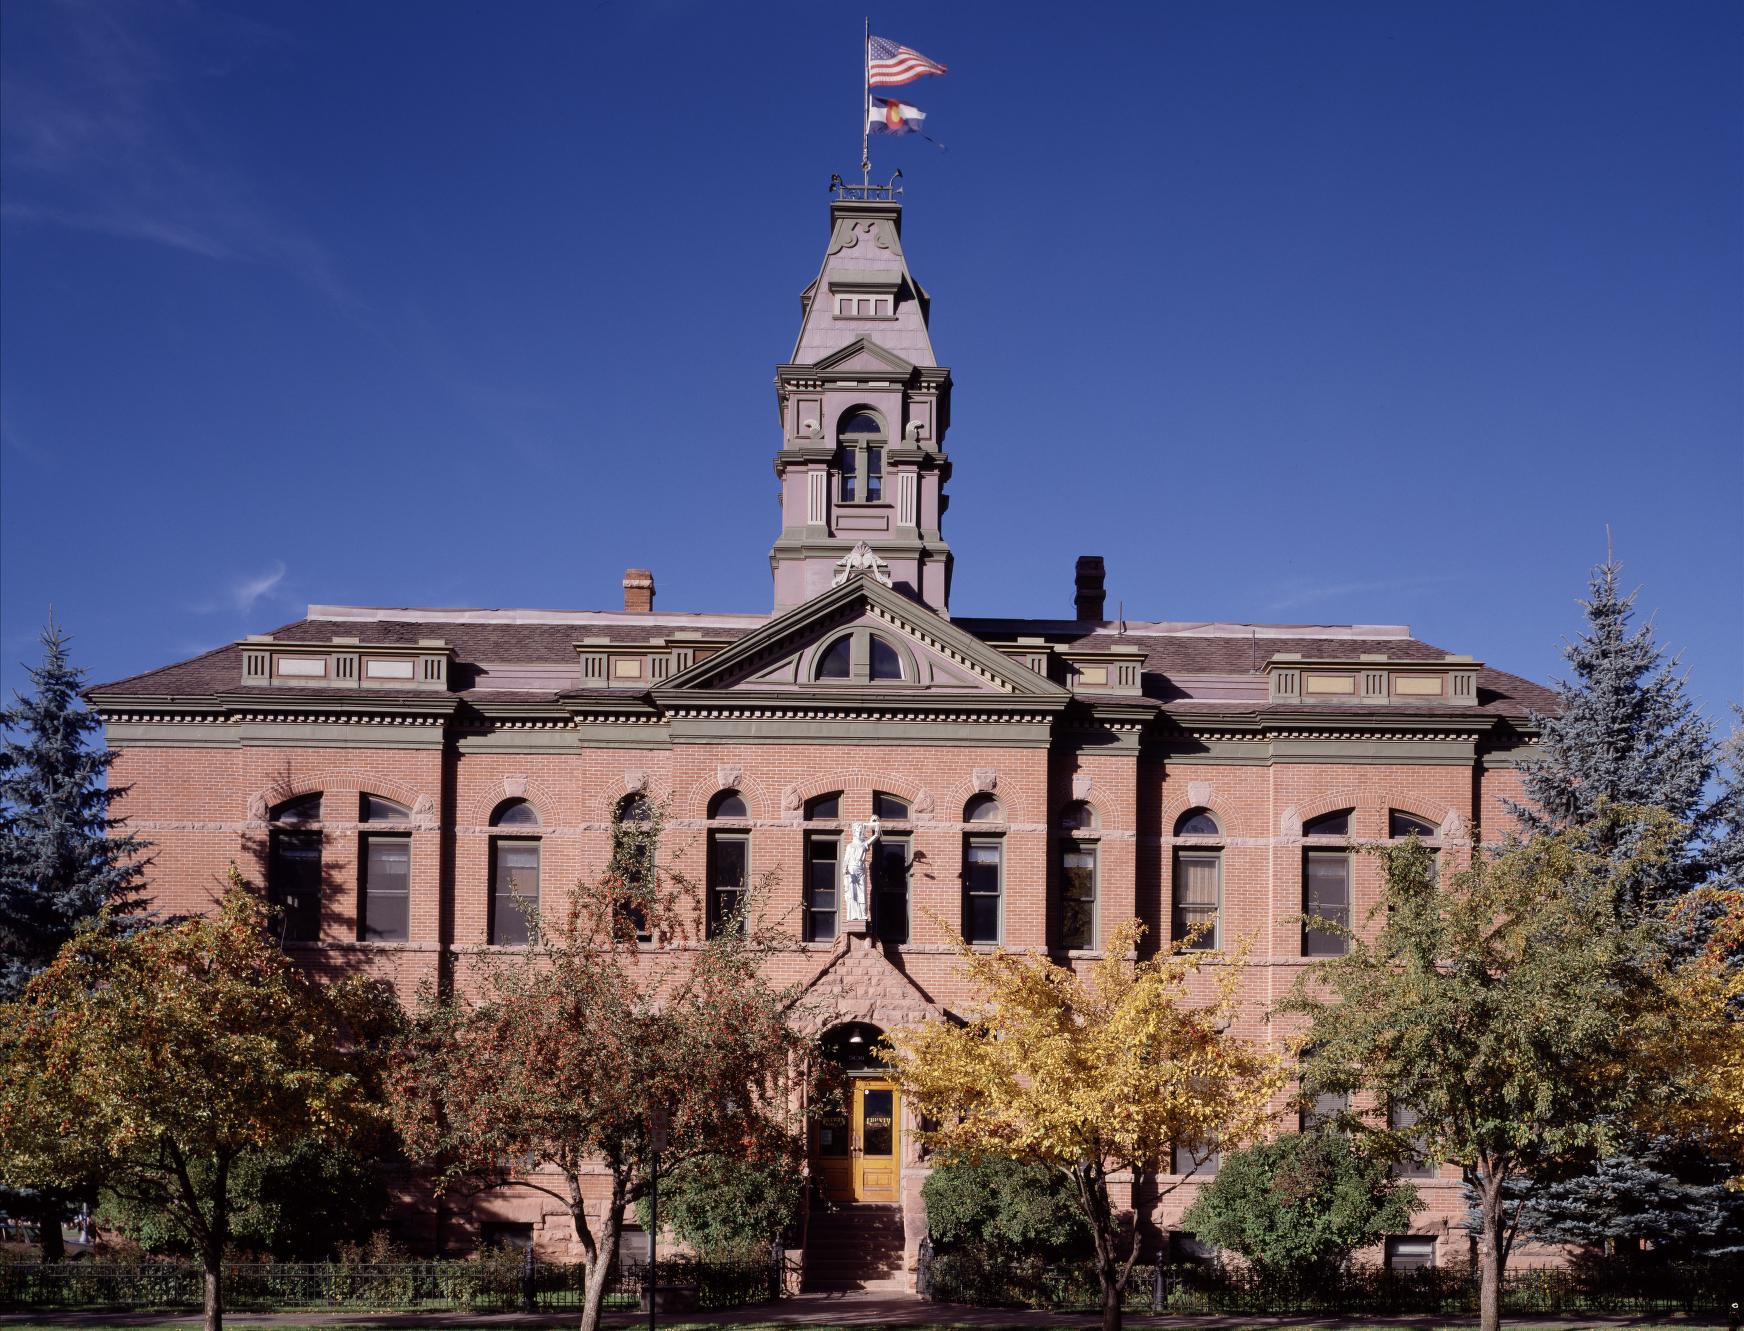 Pitkin County Court House